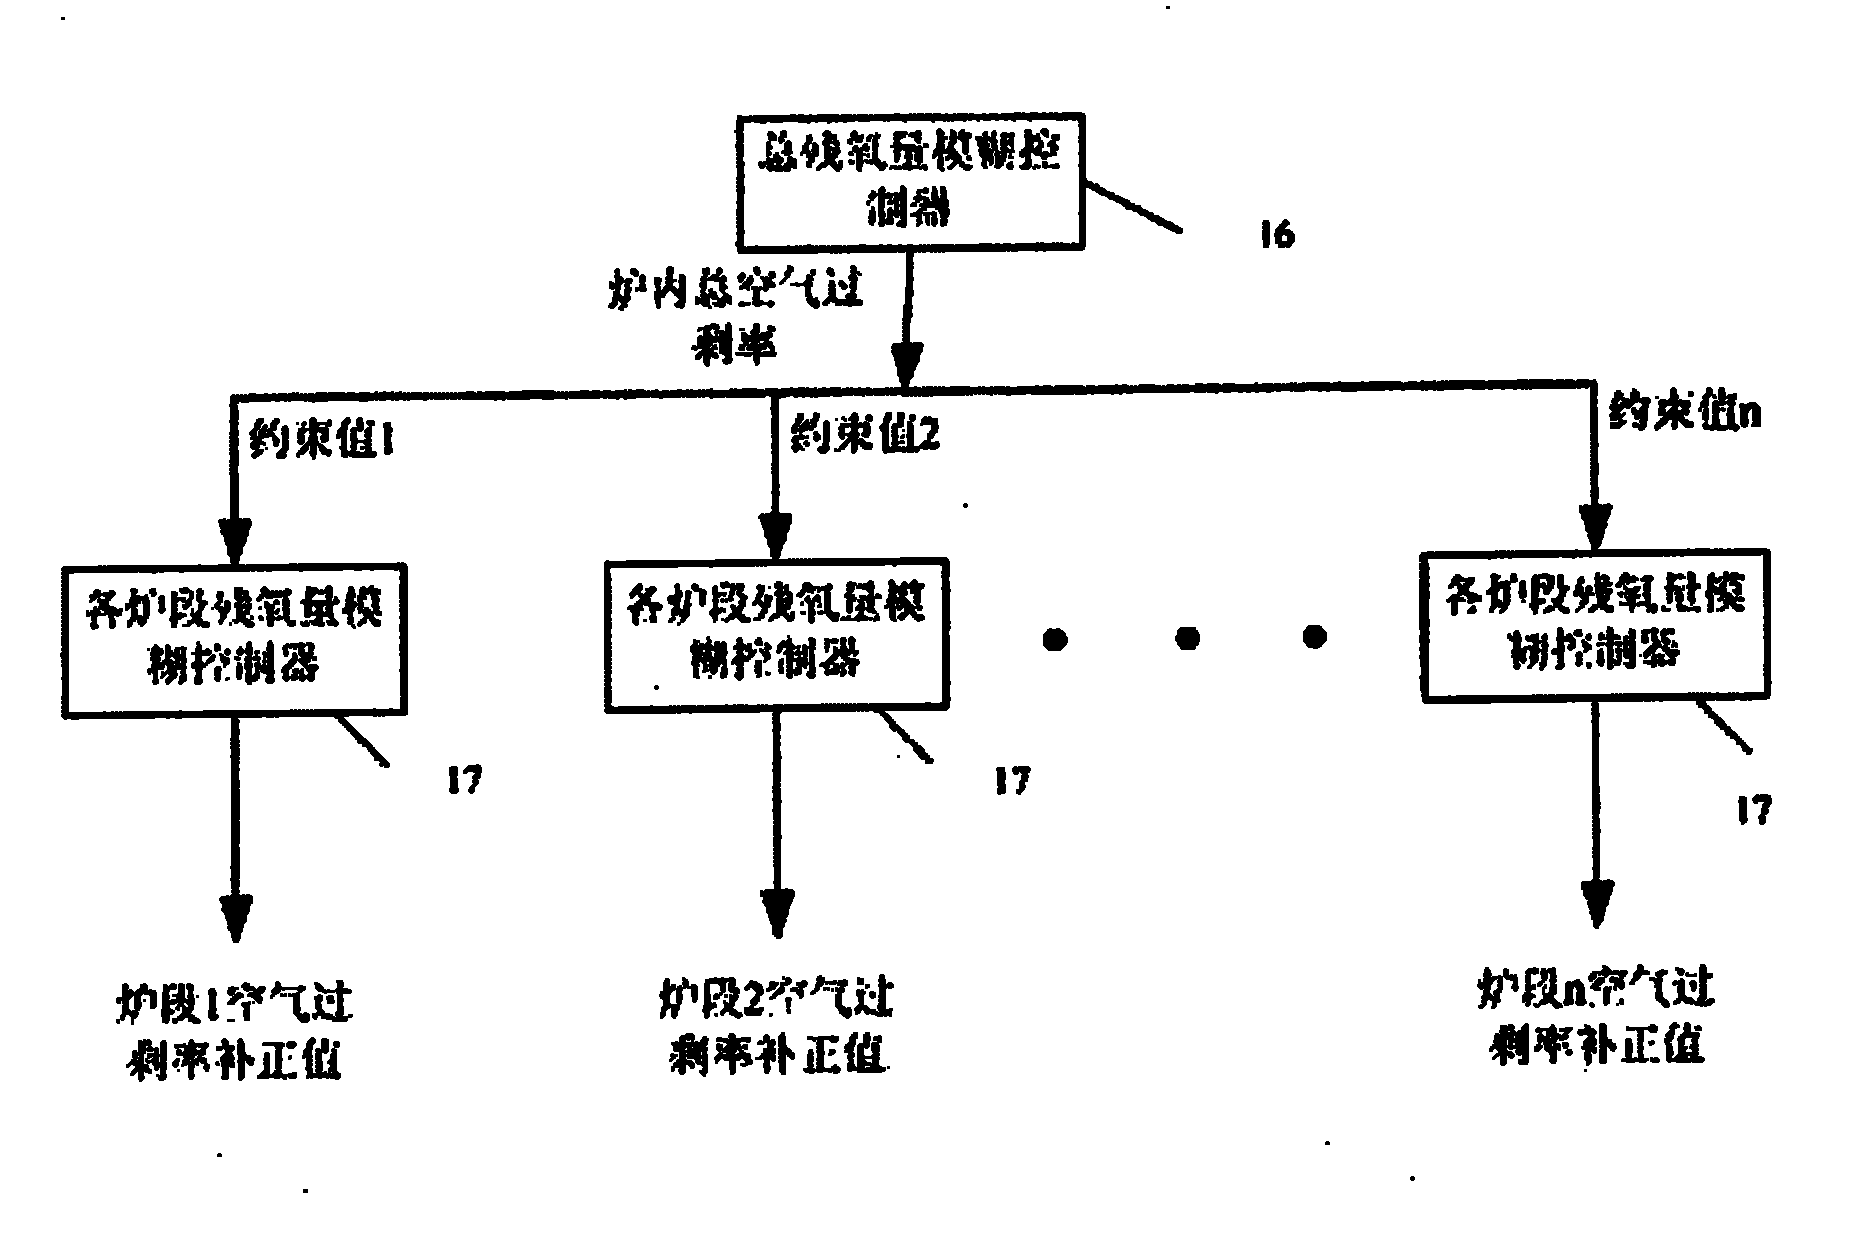 Method of controlling oxygen air-flowing environment in heating furnace